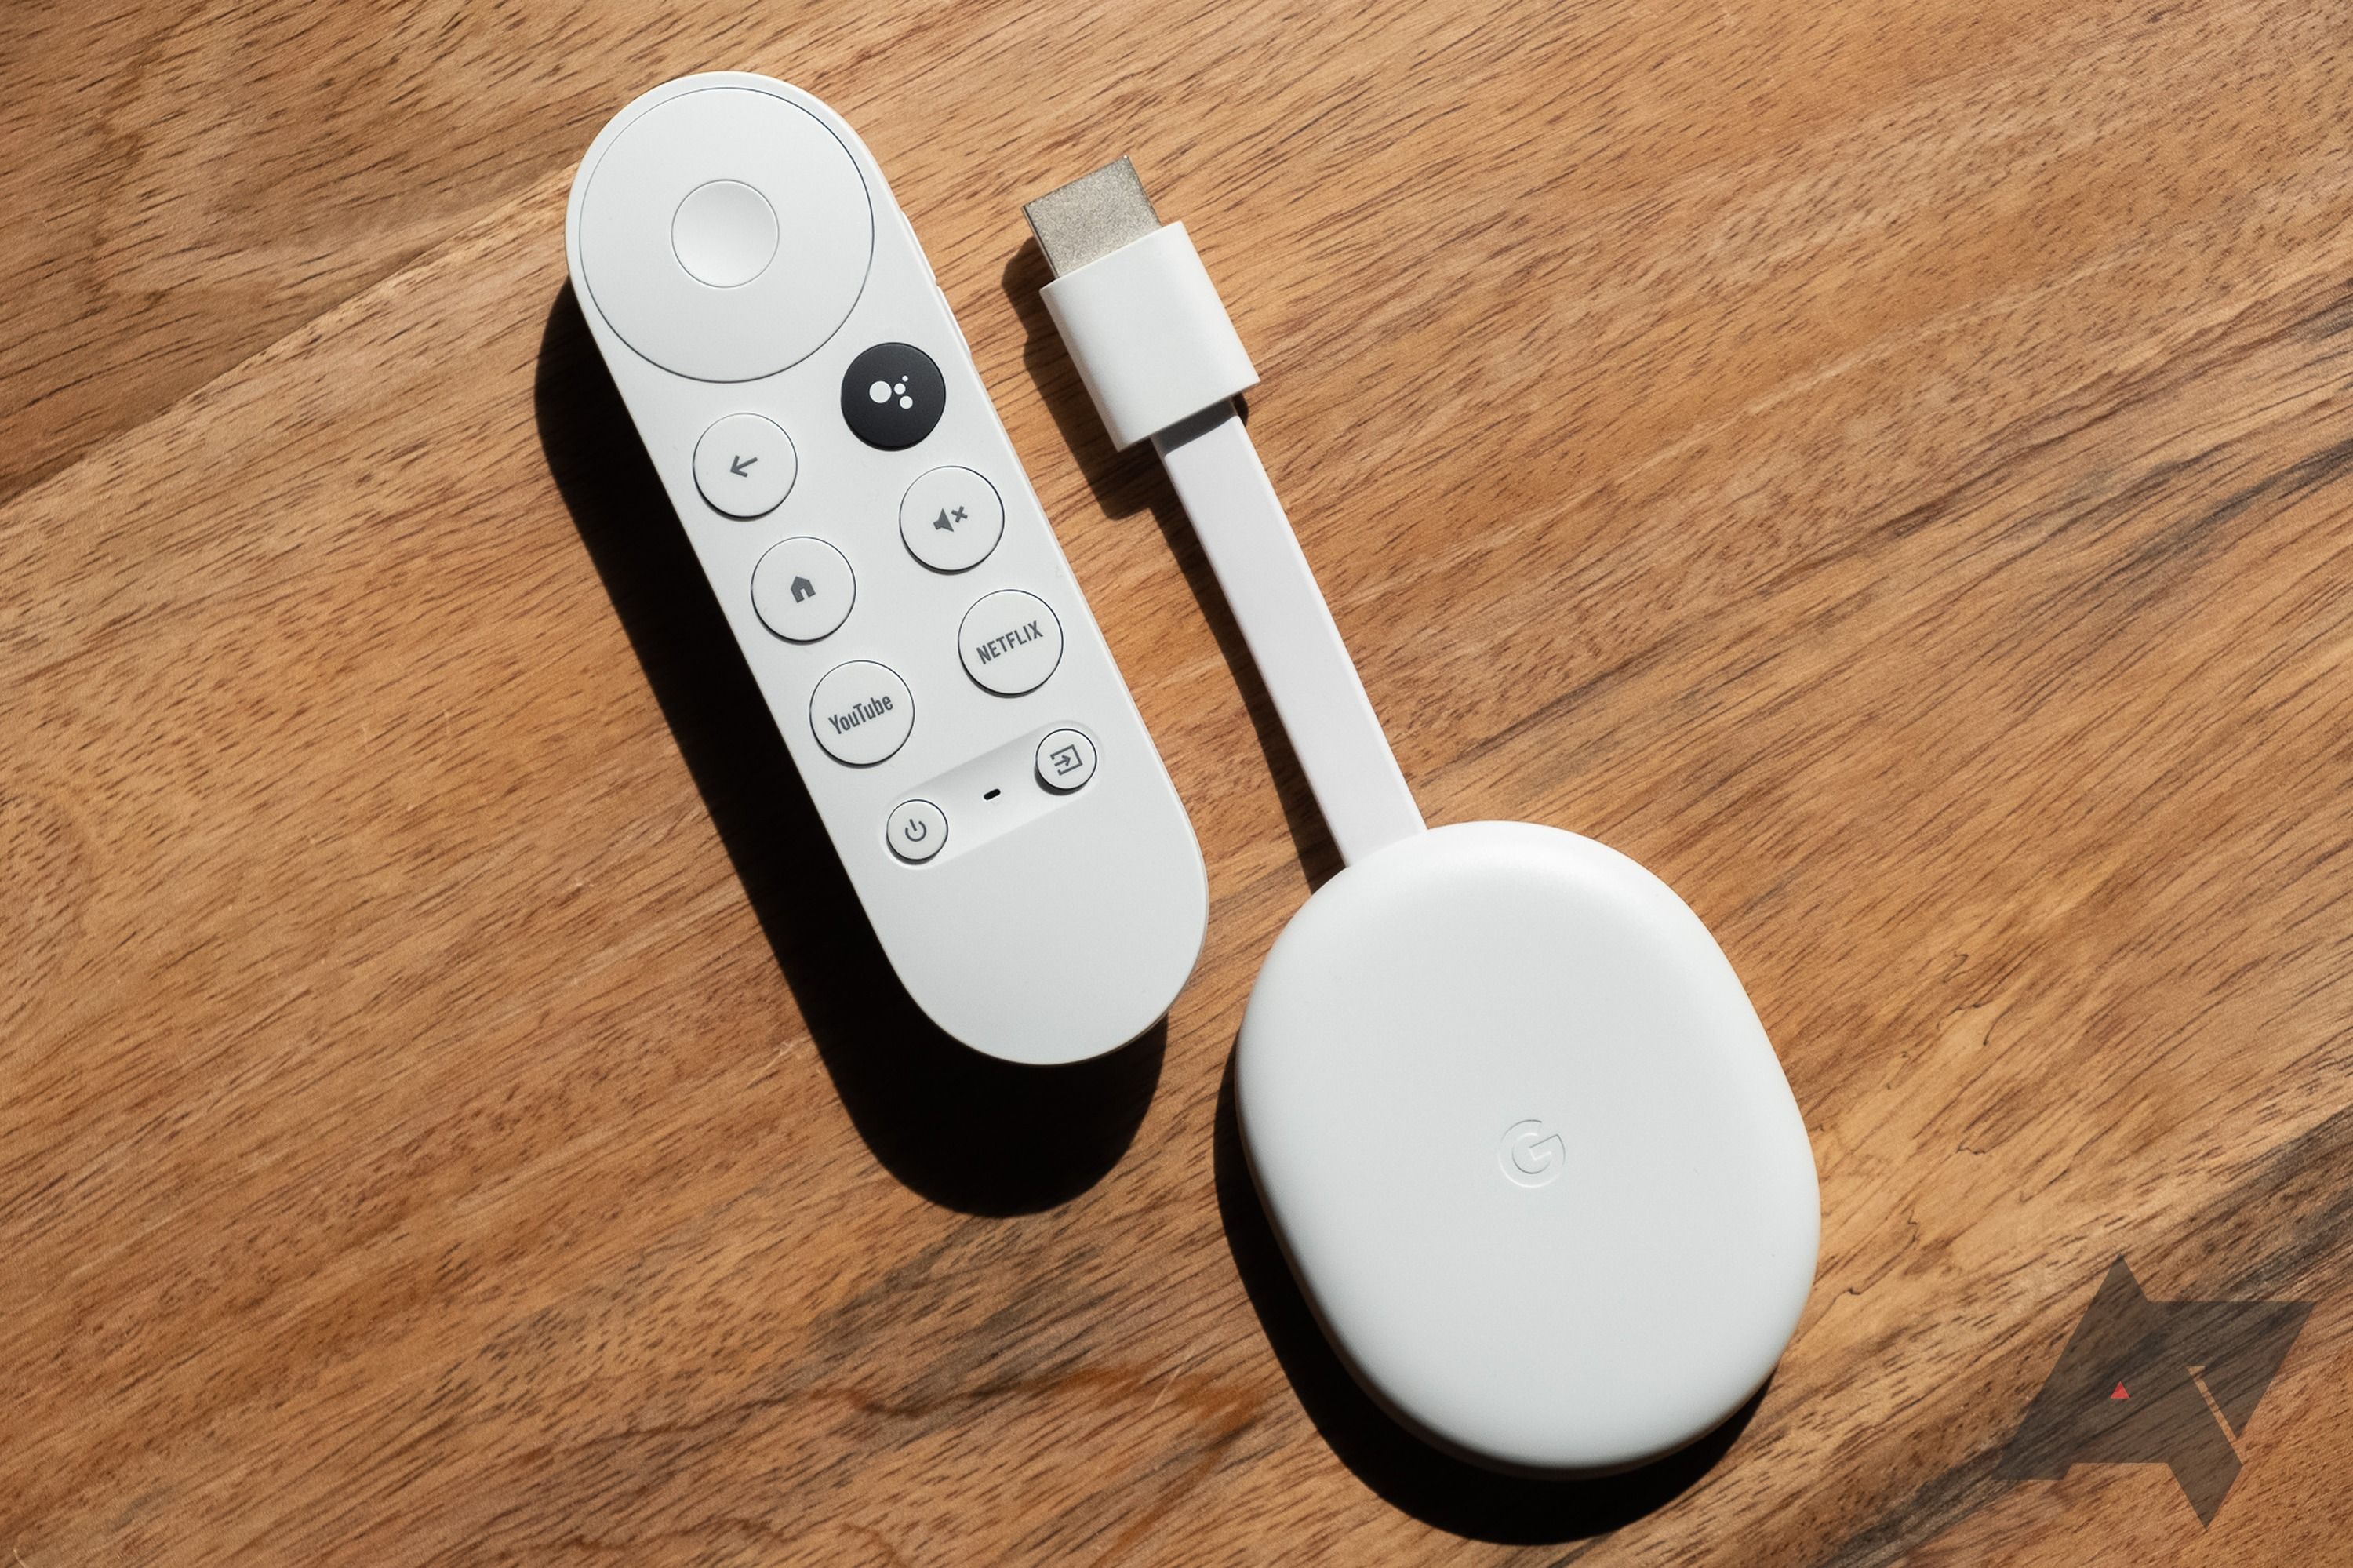 Google’s new Chromecast HD is already discounted to $20